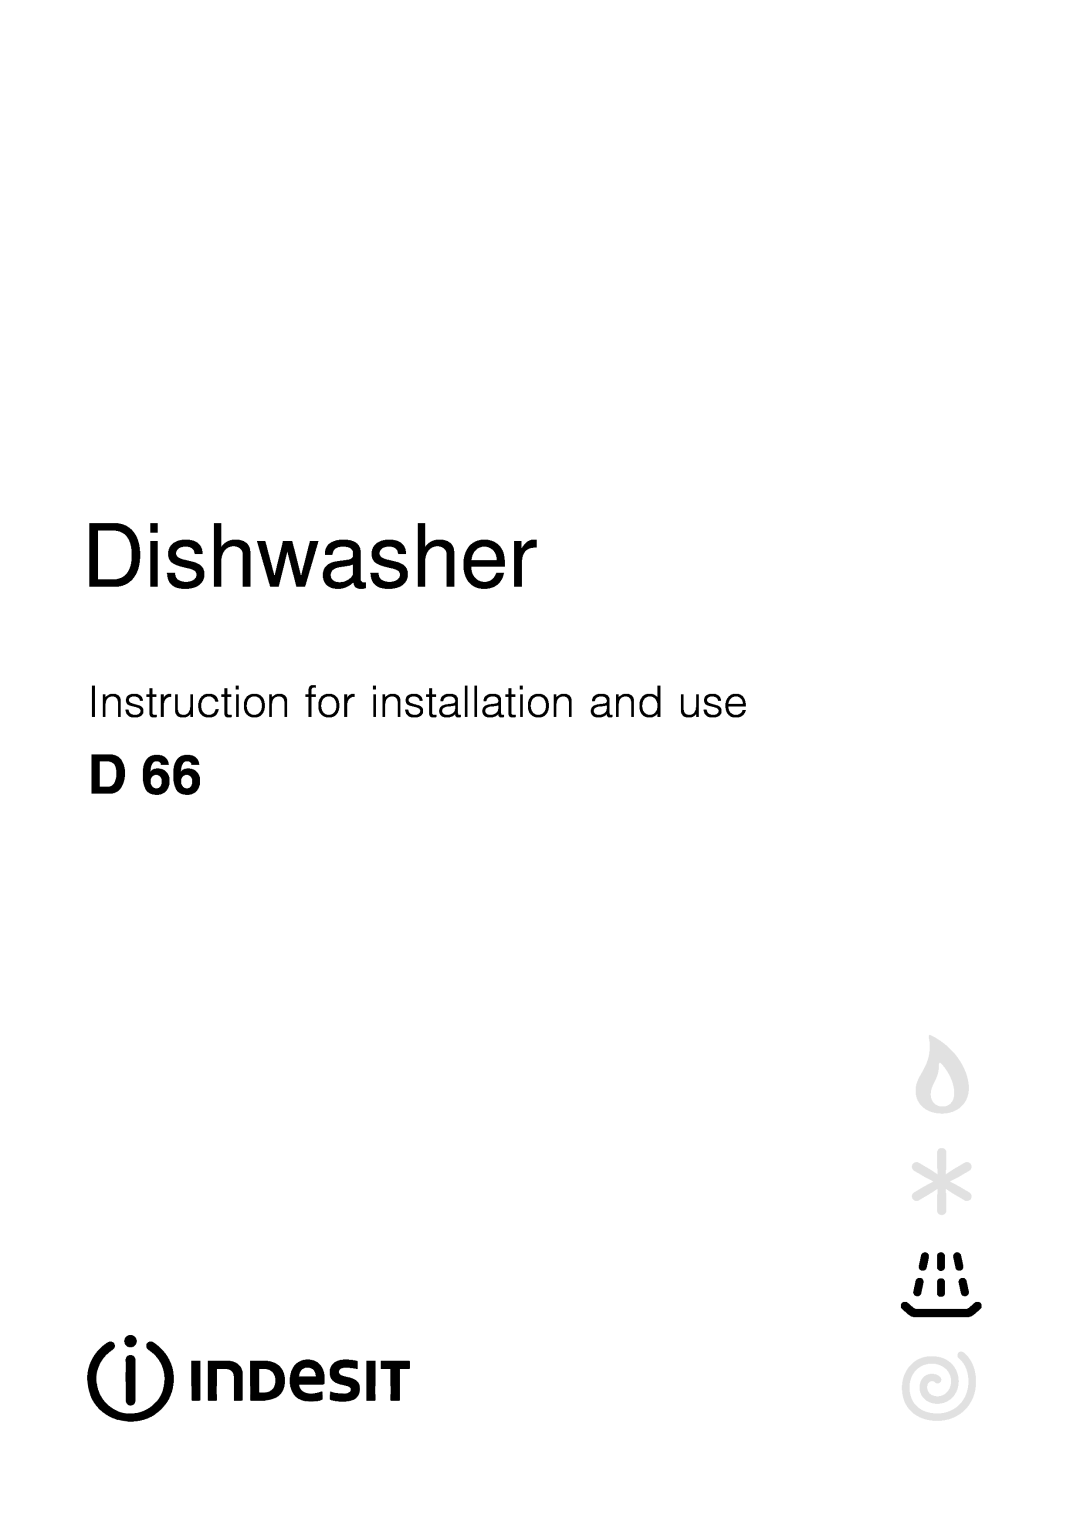 Indesit D 66 manual Dishwasher, Instruction for installation and use 